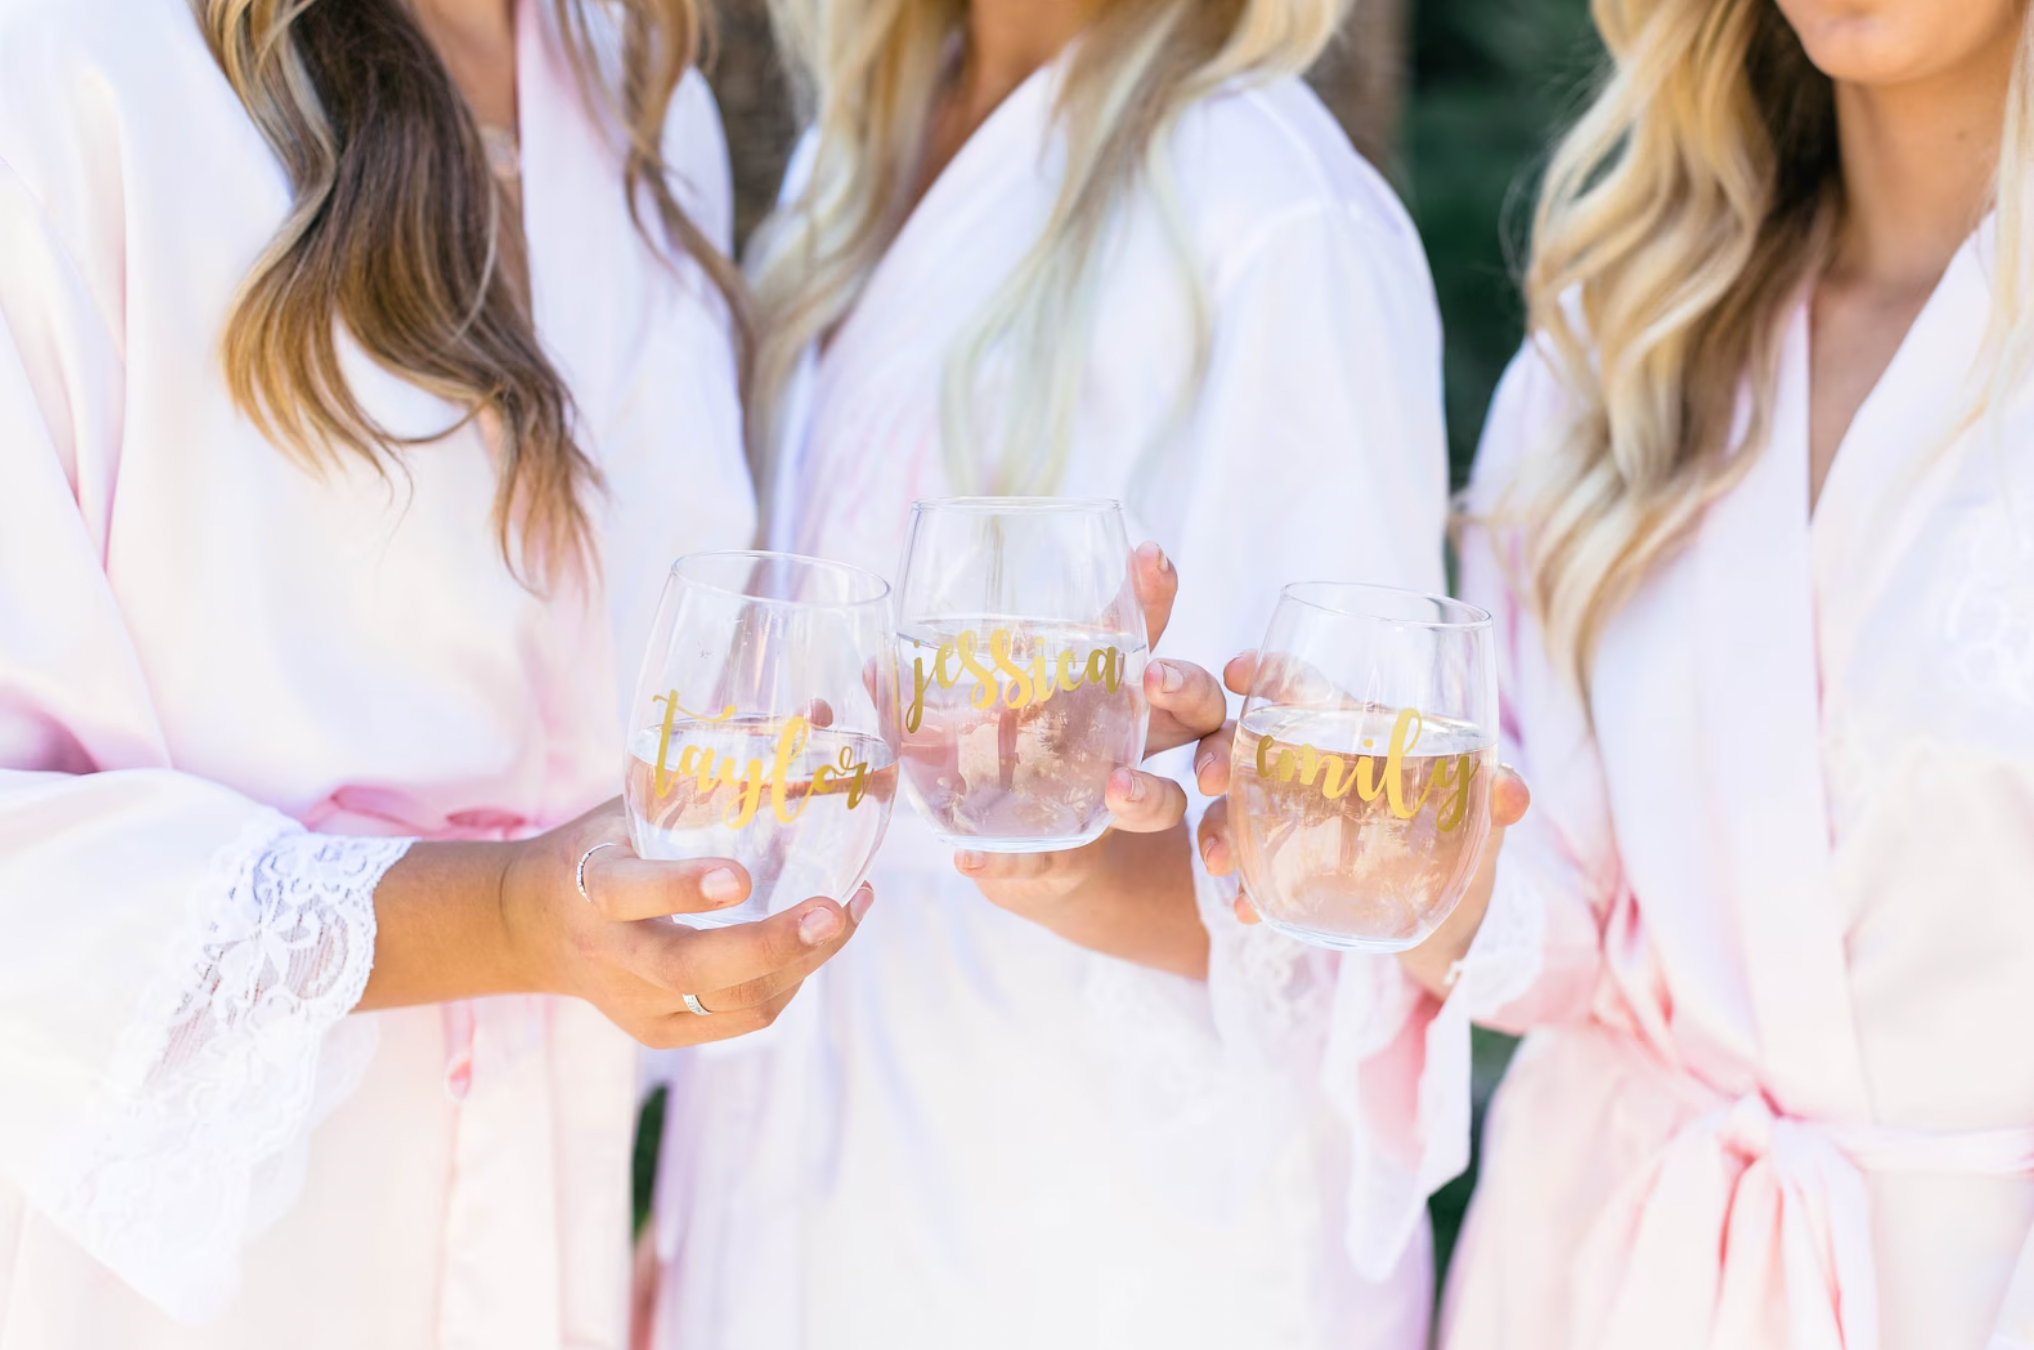 Personalized Stemless Gold Bridesmaid Wedding Wine Glass